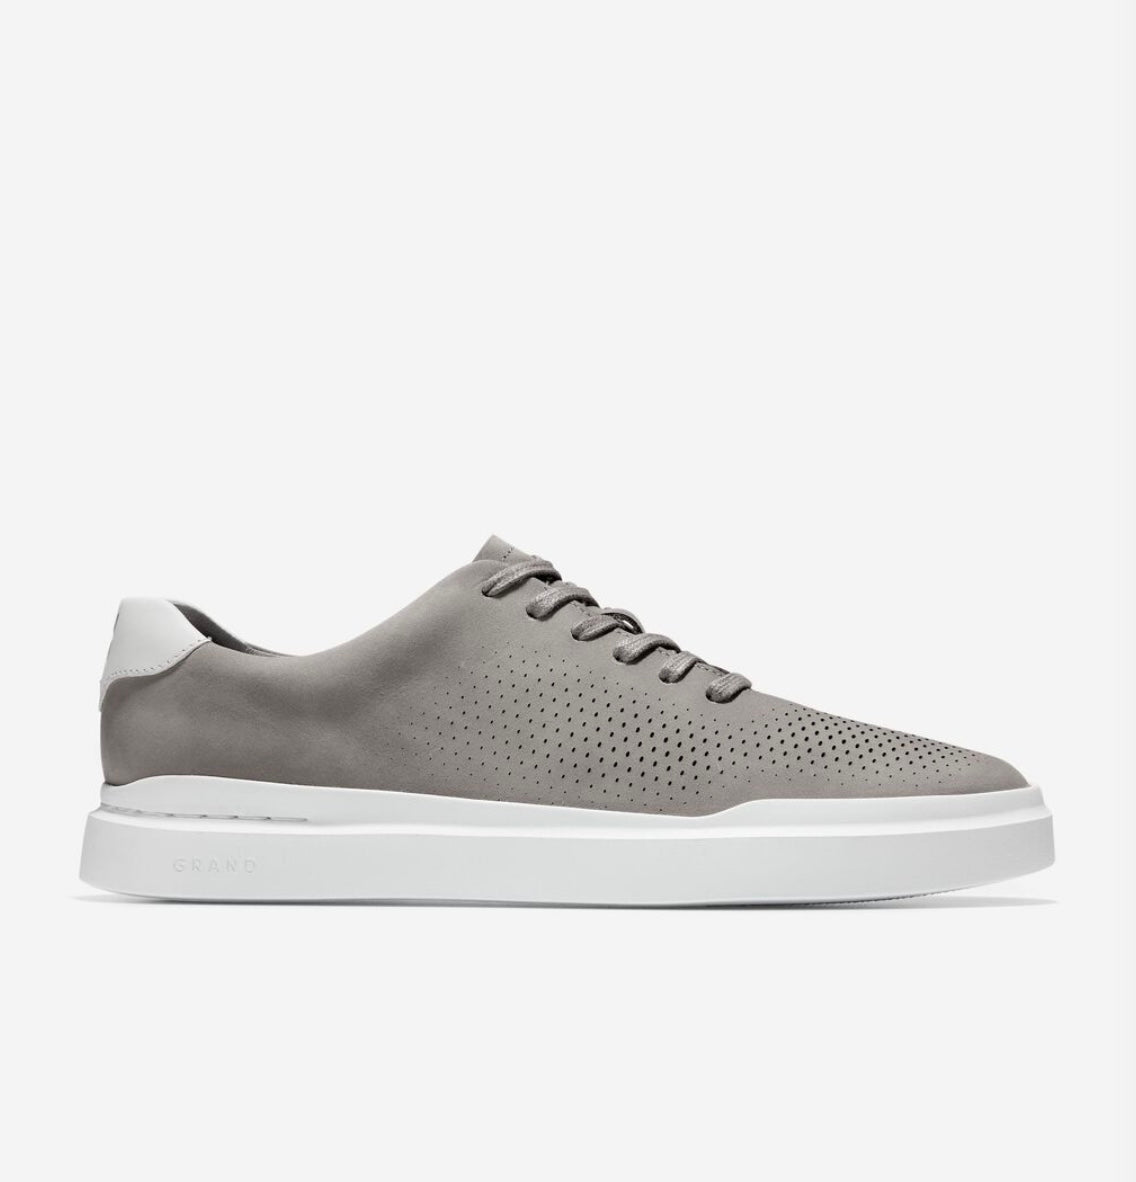 Cole Haan GrandPro Rally Laser Cut sneakers - Ironstone/Optic White